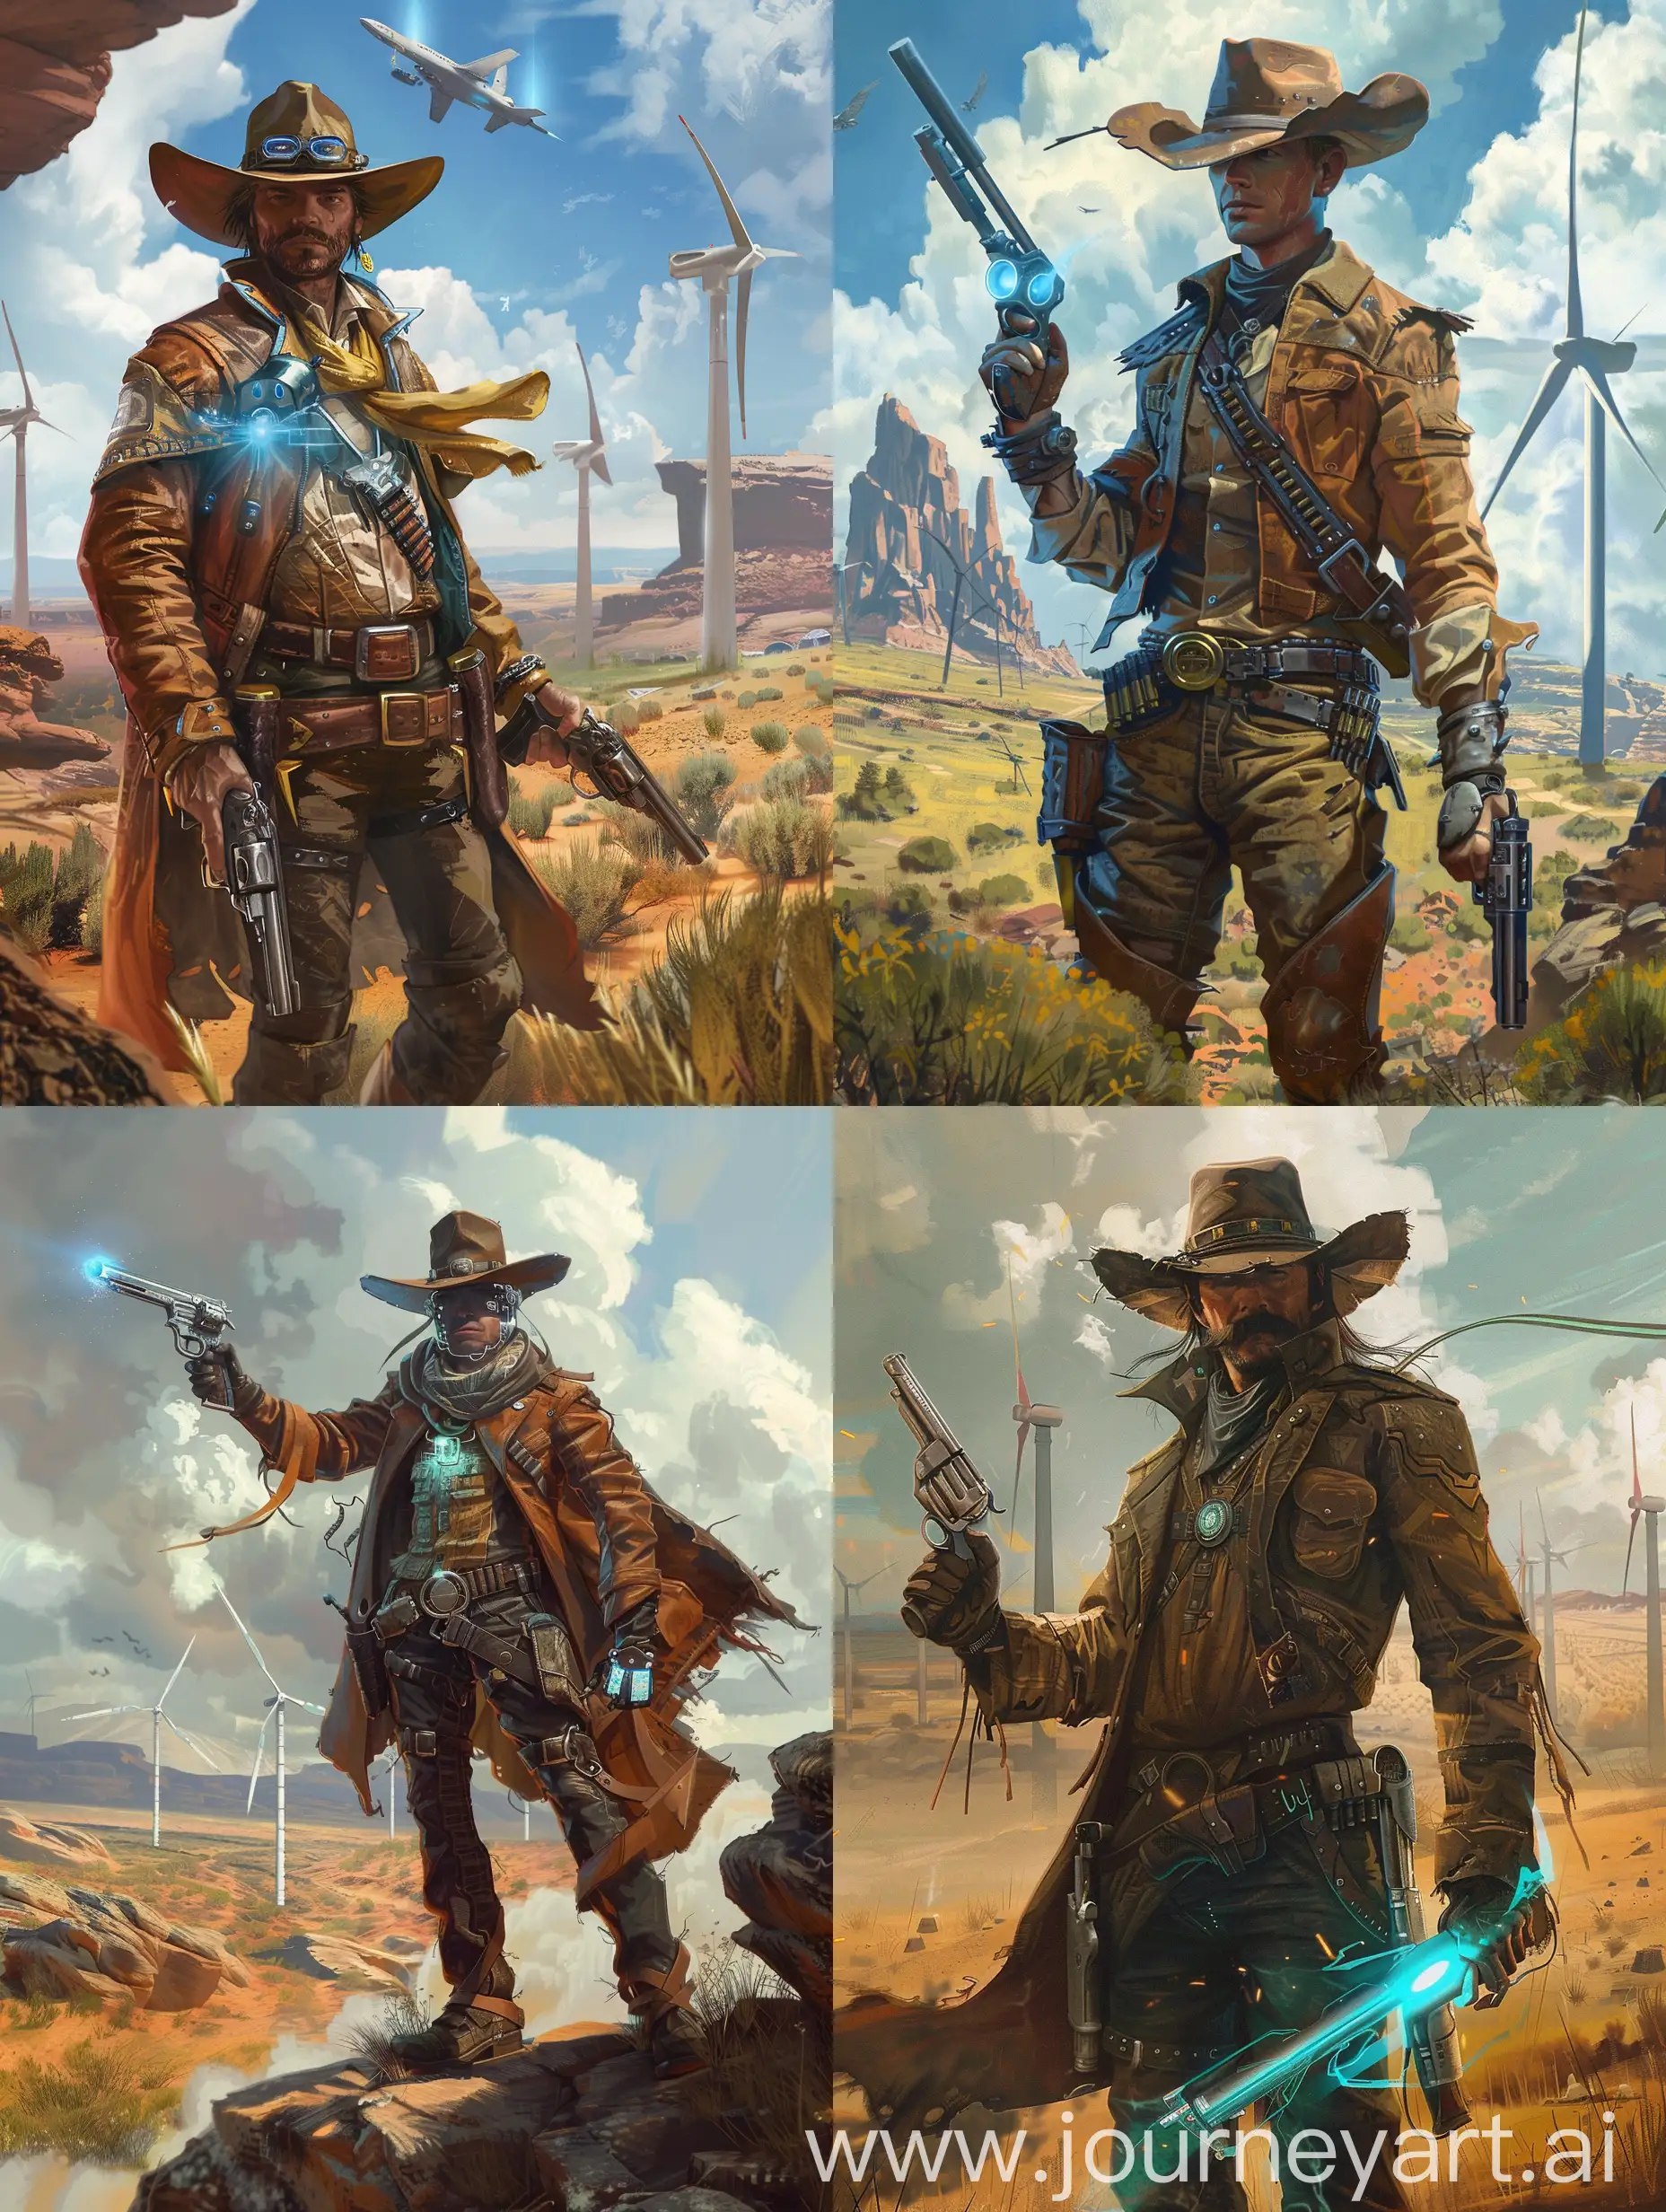 Futuristic-Cowboy-Amid-Windmills-in-Texas-with-Holographic-Guns